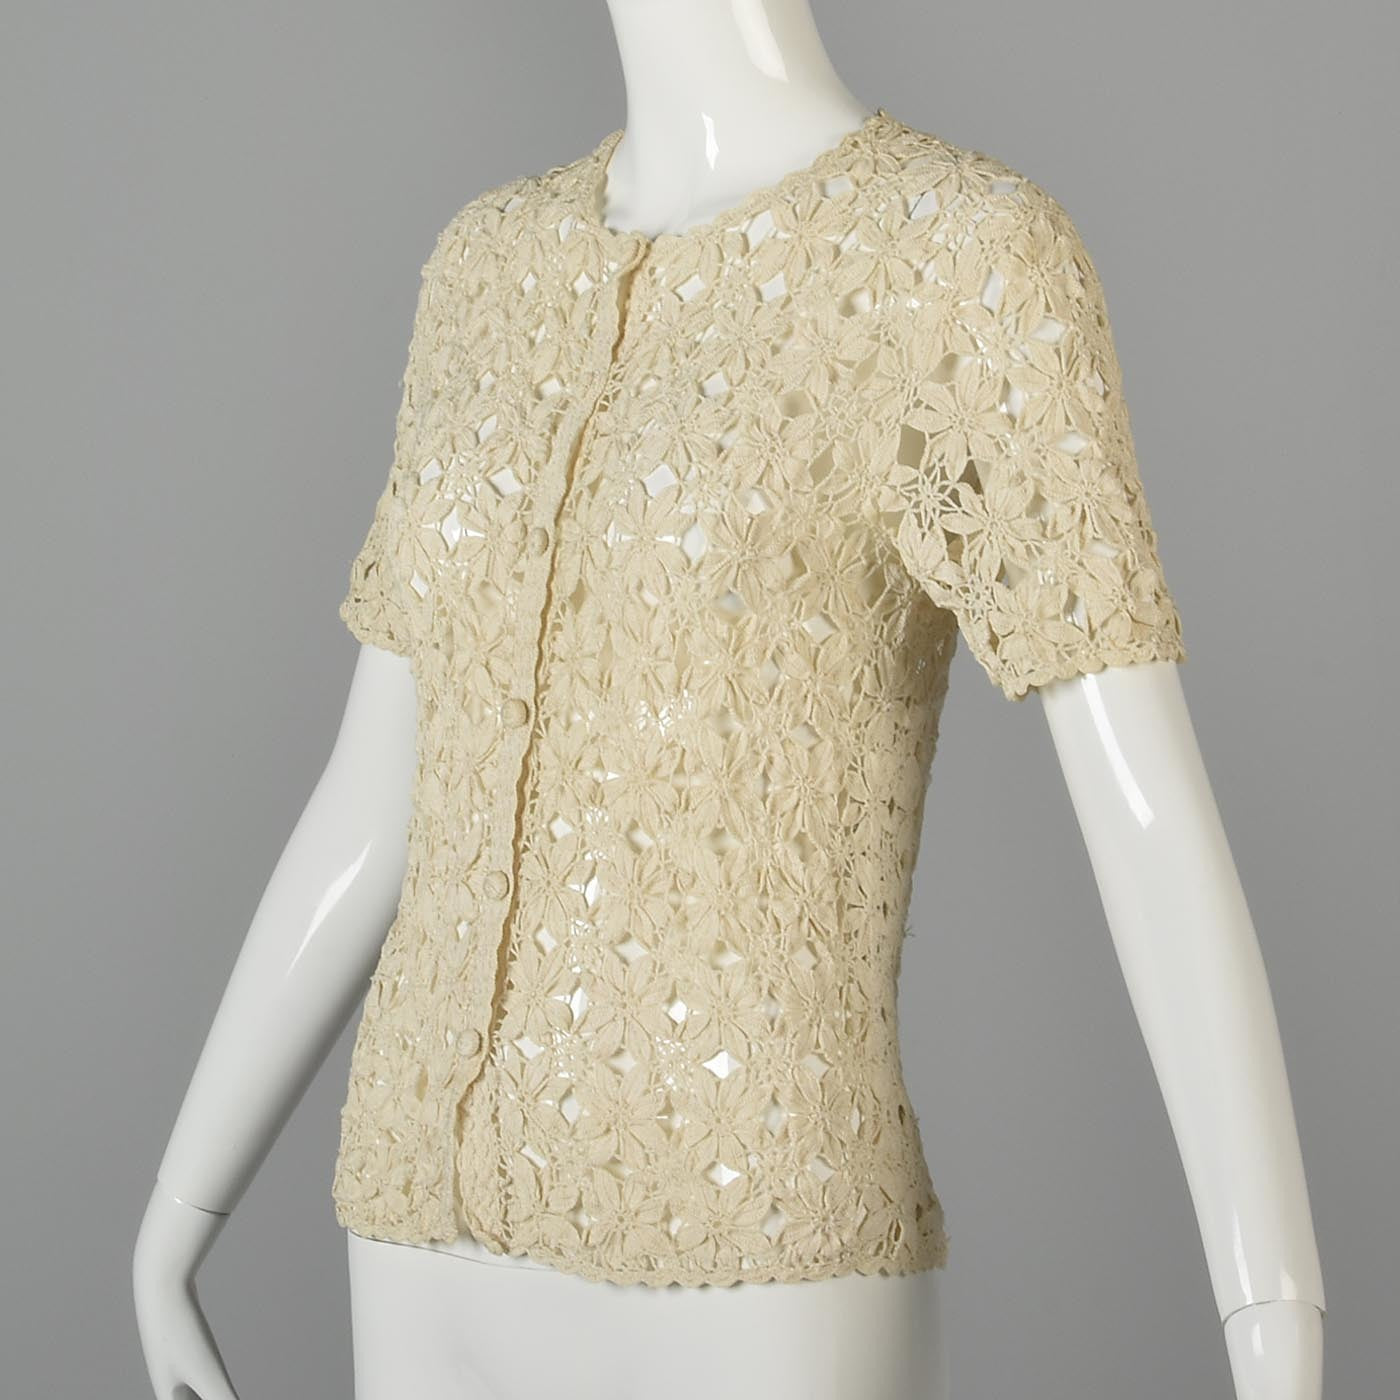 1960s Cotton Crochet Cardigan with Floral Design